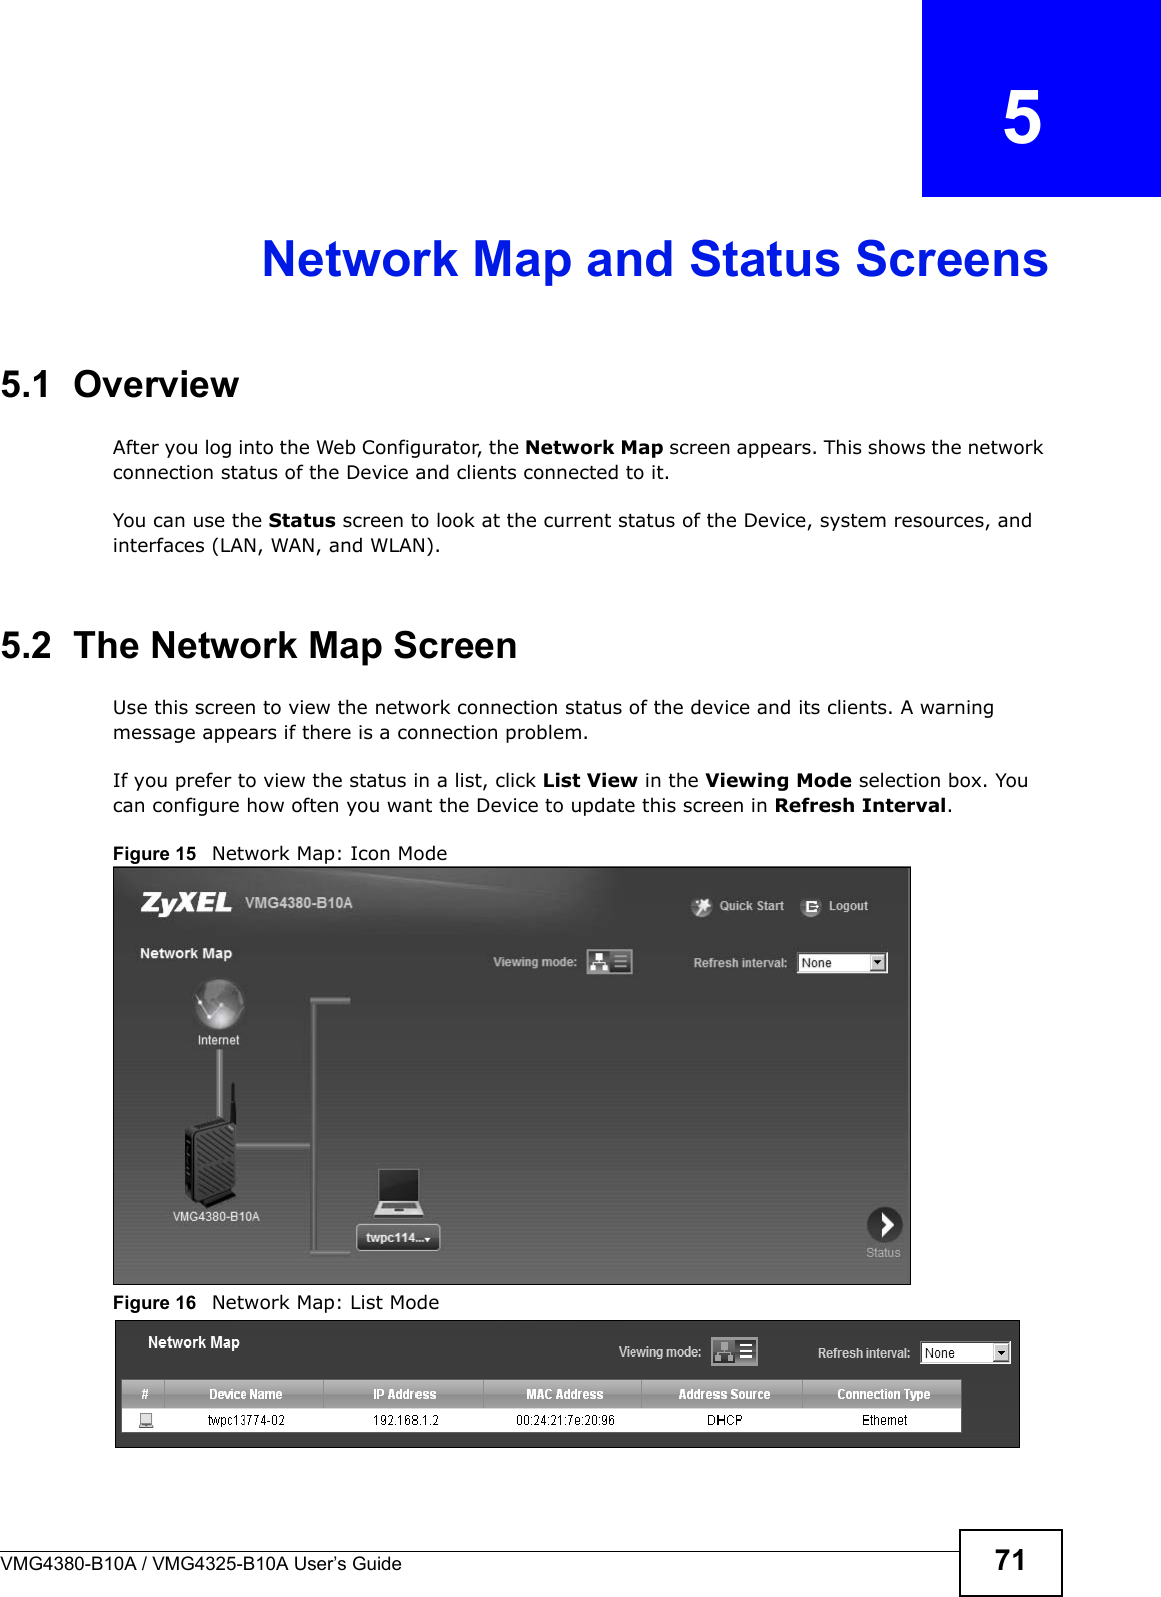 VMG4380-B10A / VMG4325-B10A User’s Guide 71CHAPTER  5Network Map and Status Screens5.1  OverviewAfter you log into the Web Configurator, the Network Map screen appears. This shows the network connection status of the Device and clients connected to it. You can use the Status screen to look at the current status of the Device, system resources, and interfaces (LAN, WAN, and WLAN). 5.2  The Network Map ScreenUse this screen to view the network connection status of the device and its clients. A warning message appears if there is a connection problem. If you prefer to view the status in a list, click List View in the Viewing Mode selection box. You can configure how often you want the Device to update this screen in Refresh Interval.Figure 15   Network Map: Icon Mode Figure 16   Network Map: List Mode